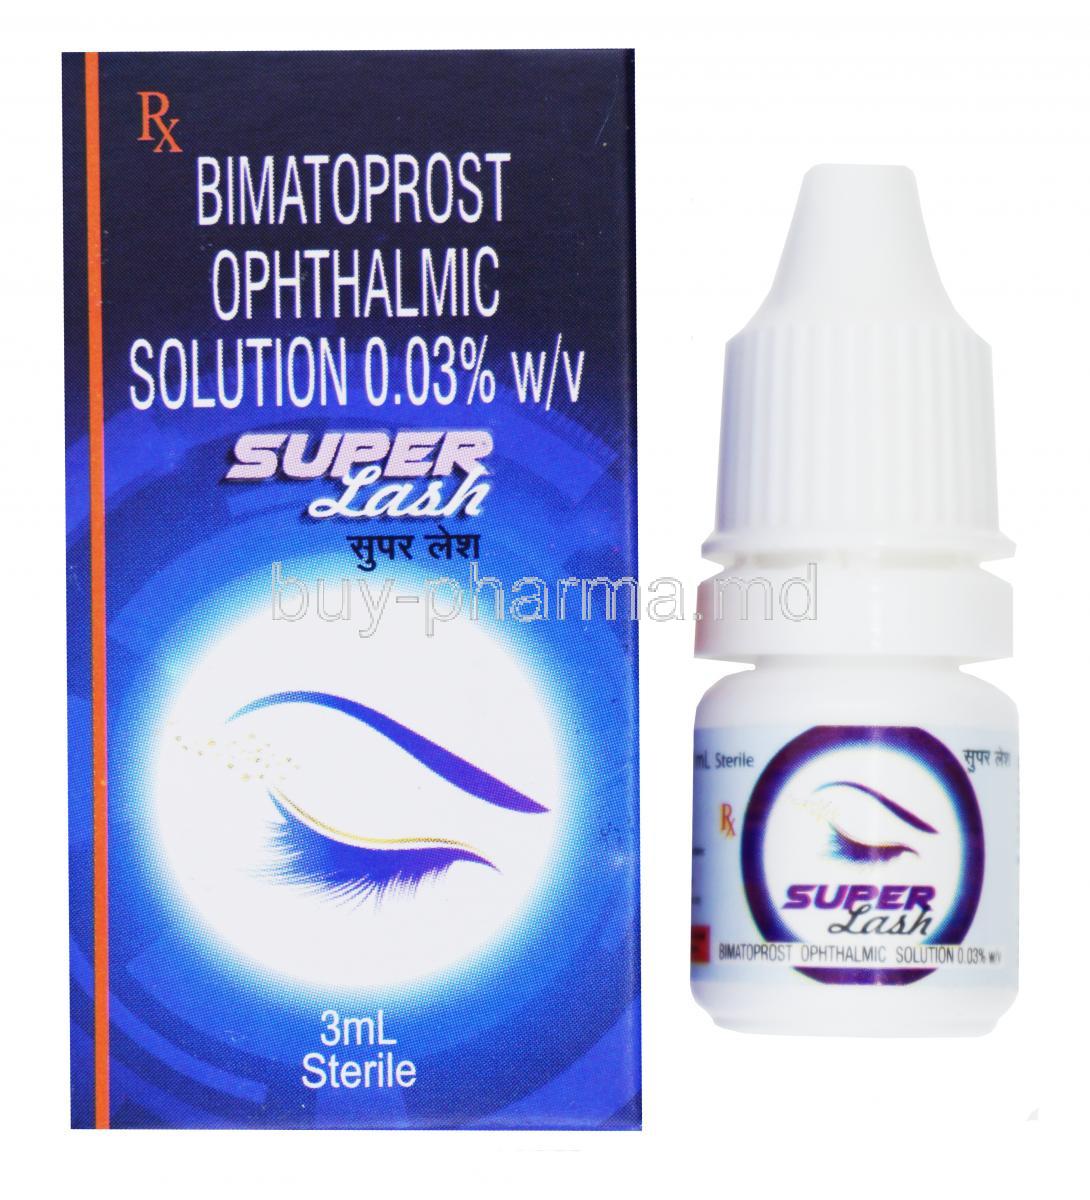 Super Lash, Bimatoprost Ophthalmic solution 0.03%, 3ml, box and bottle front presentation